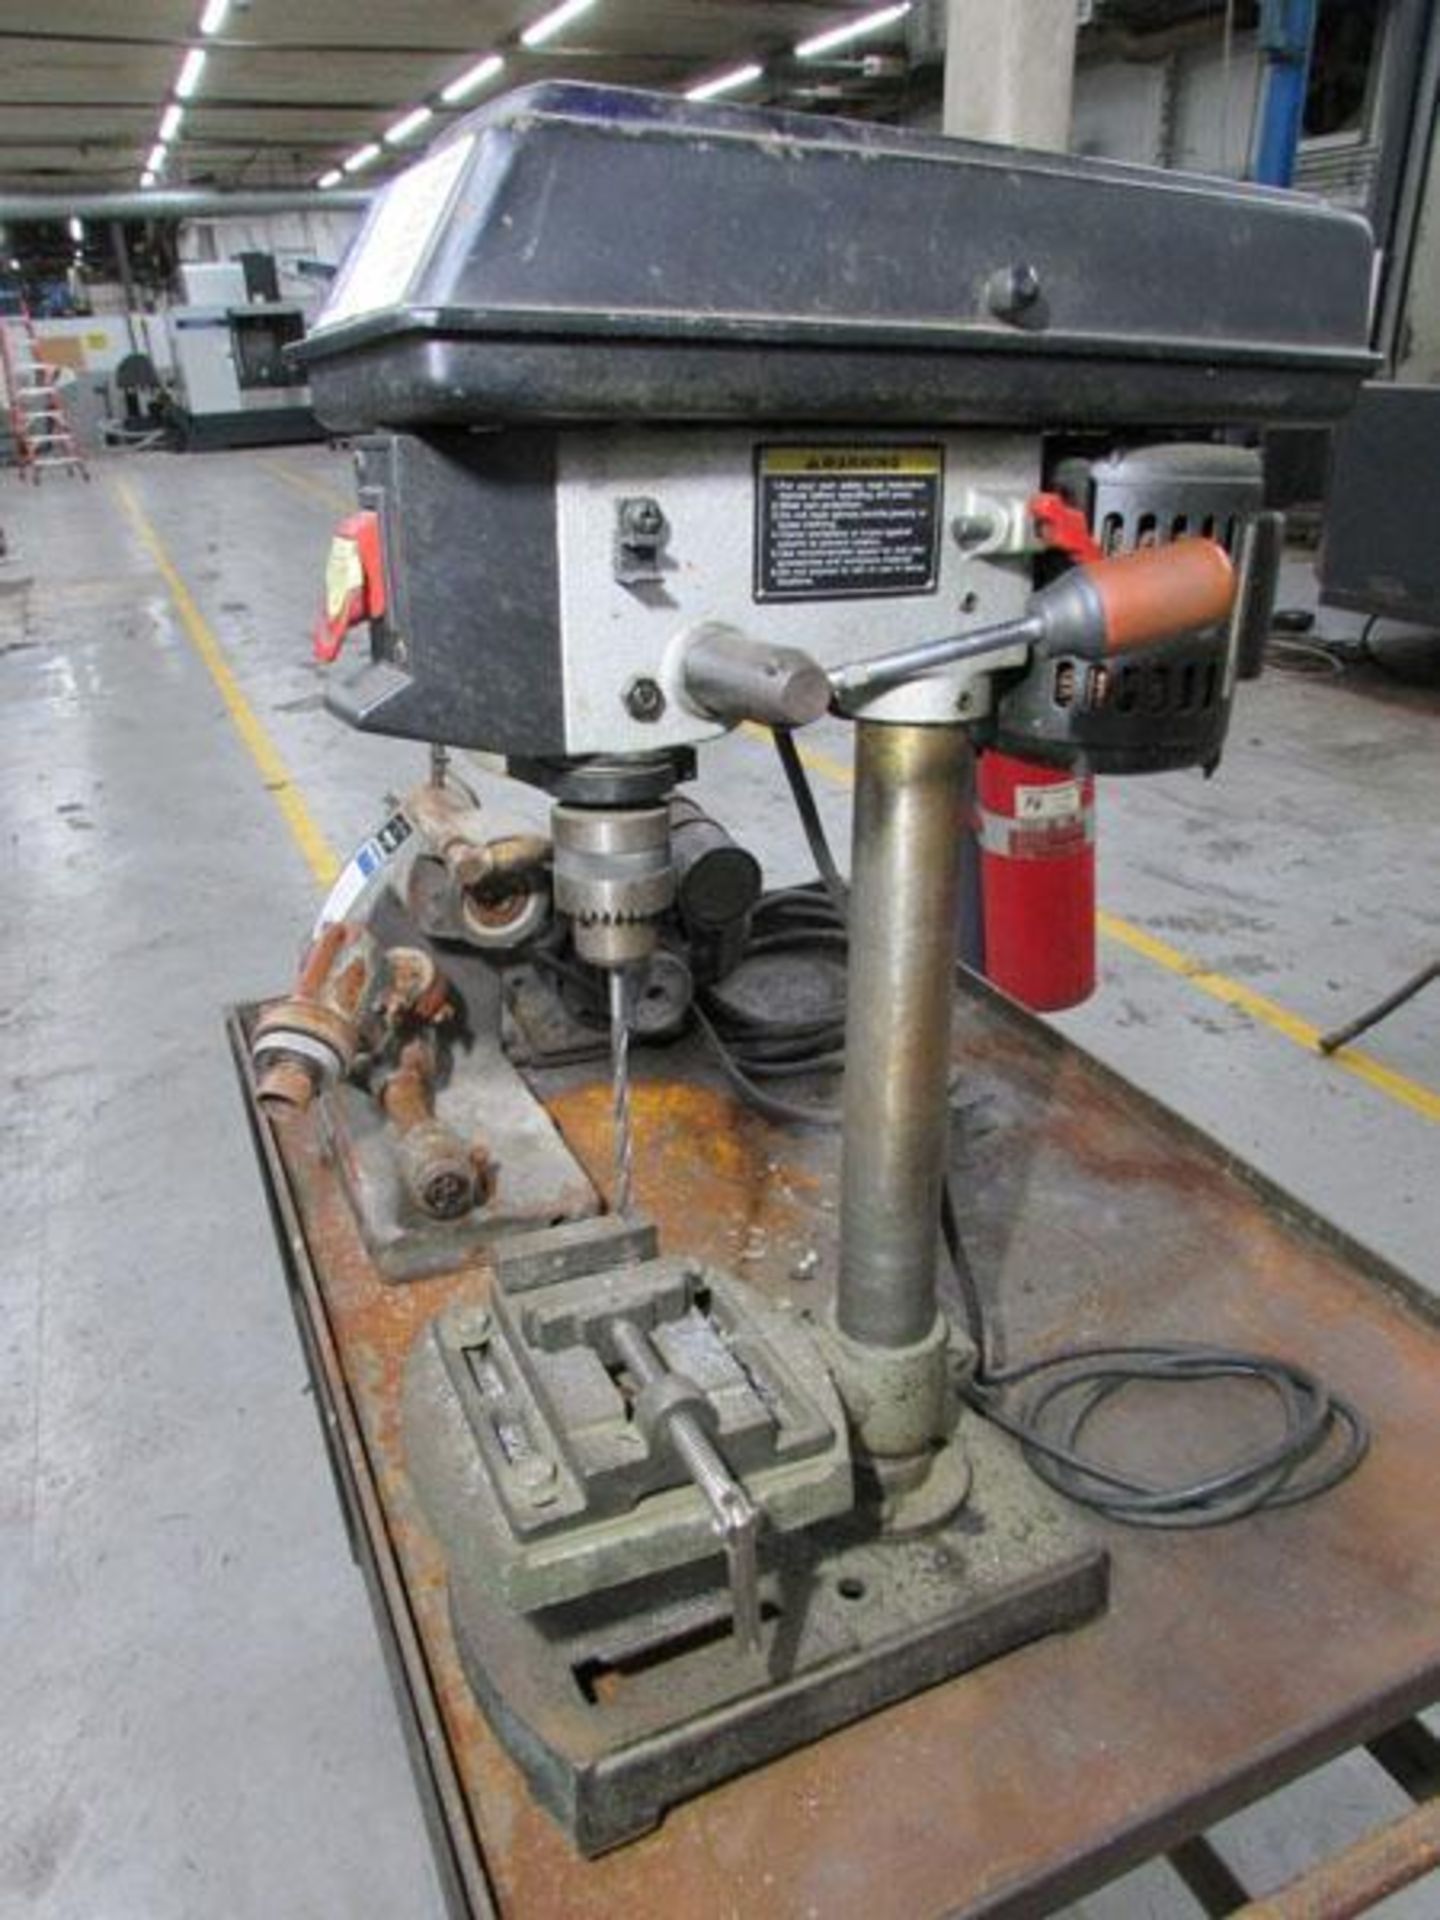 Sears 137.248030 9" Benchtop Drill Press - Image 3 of 4